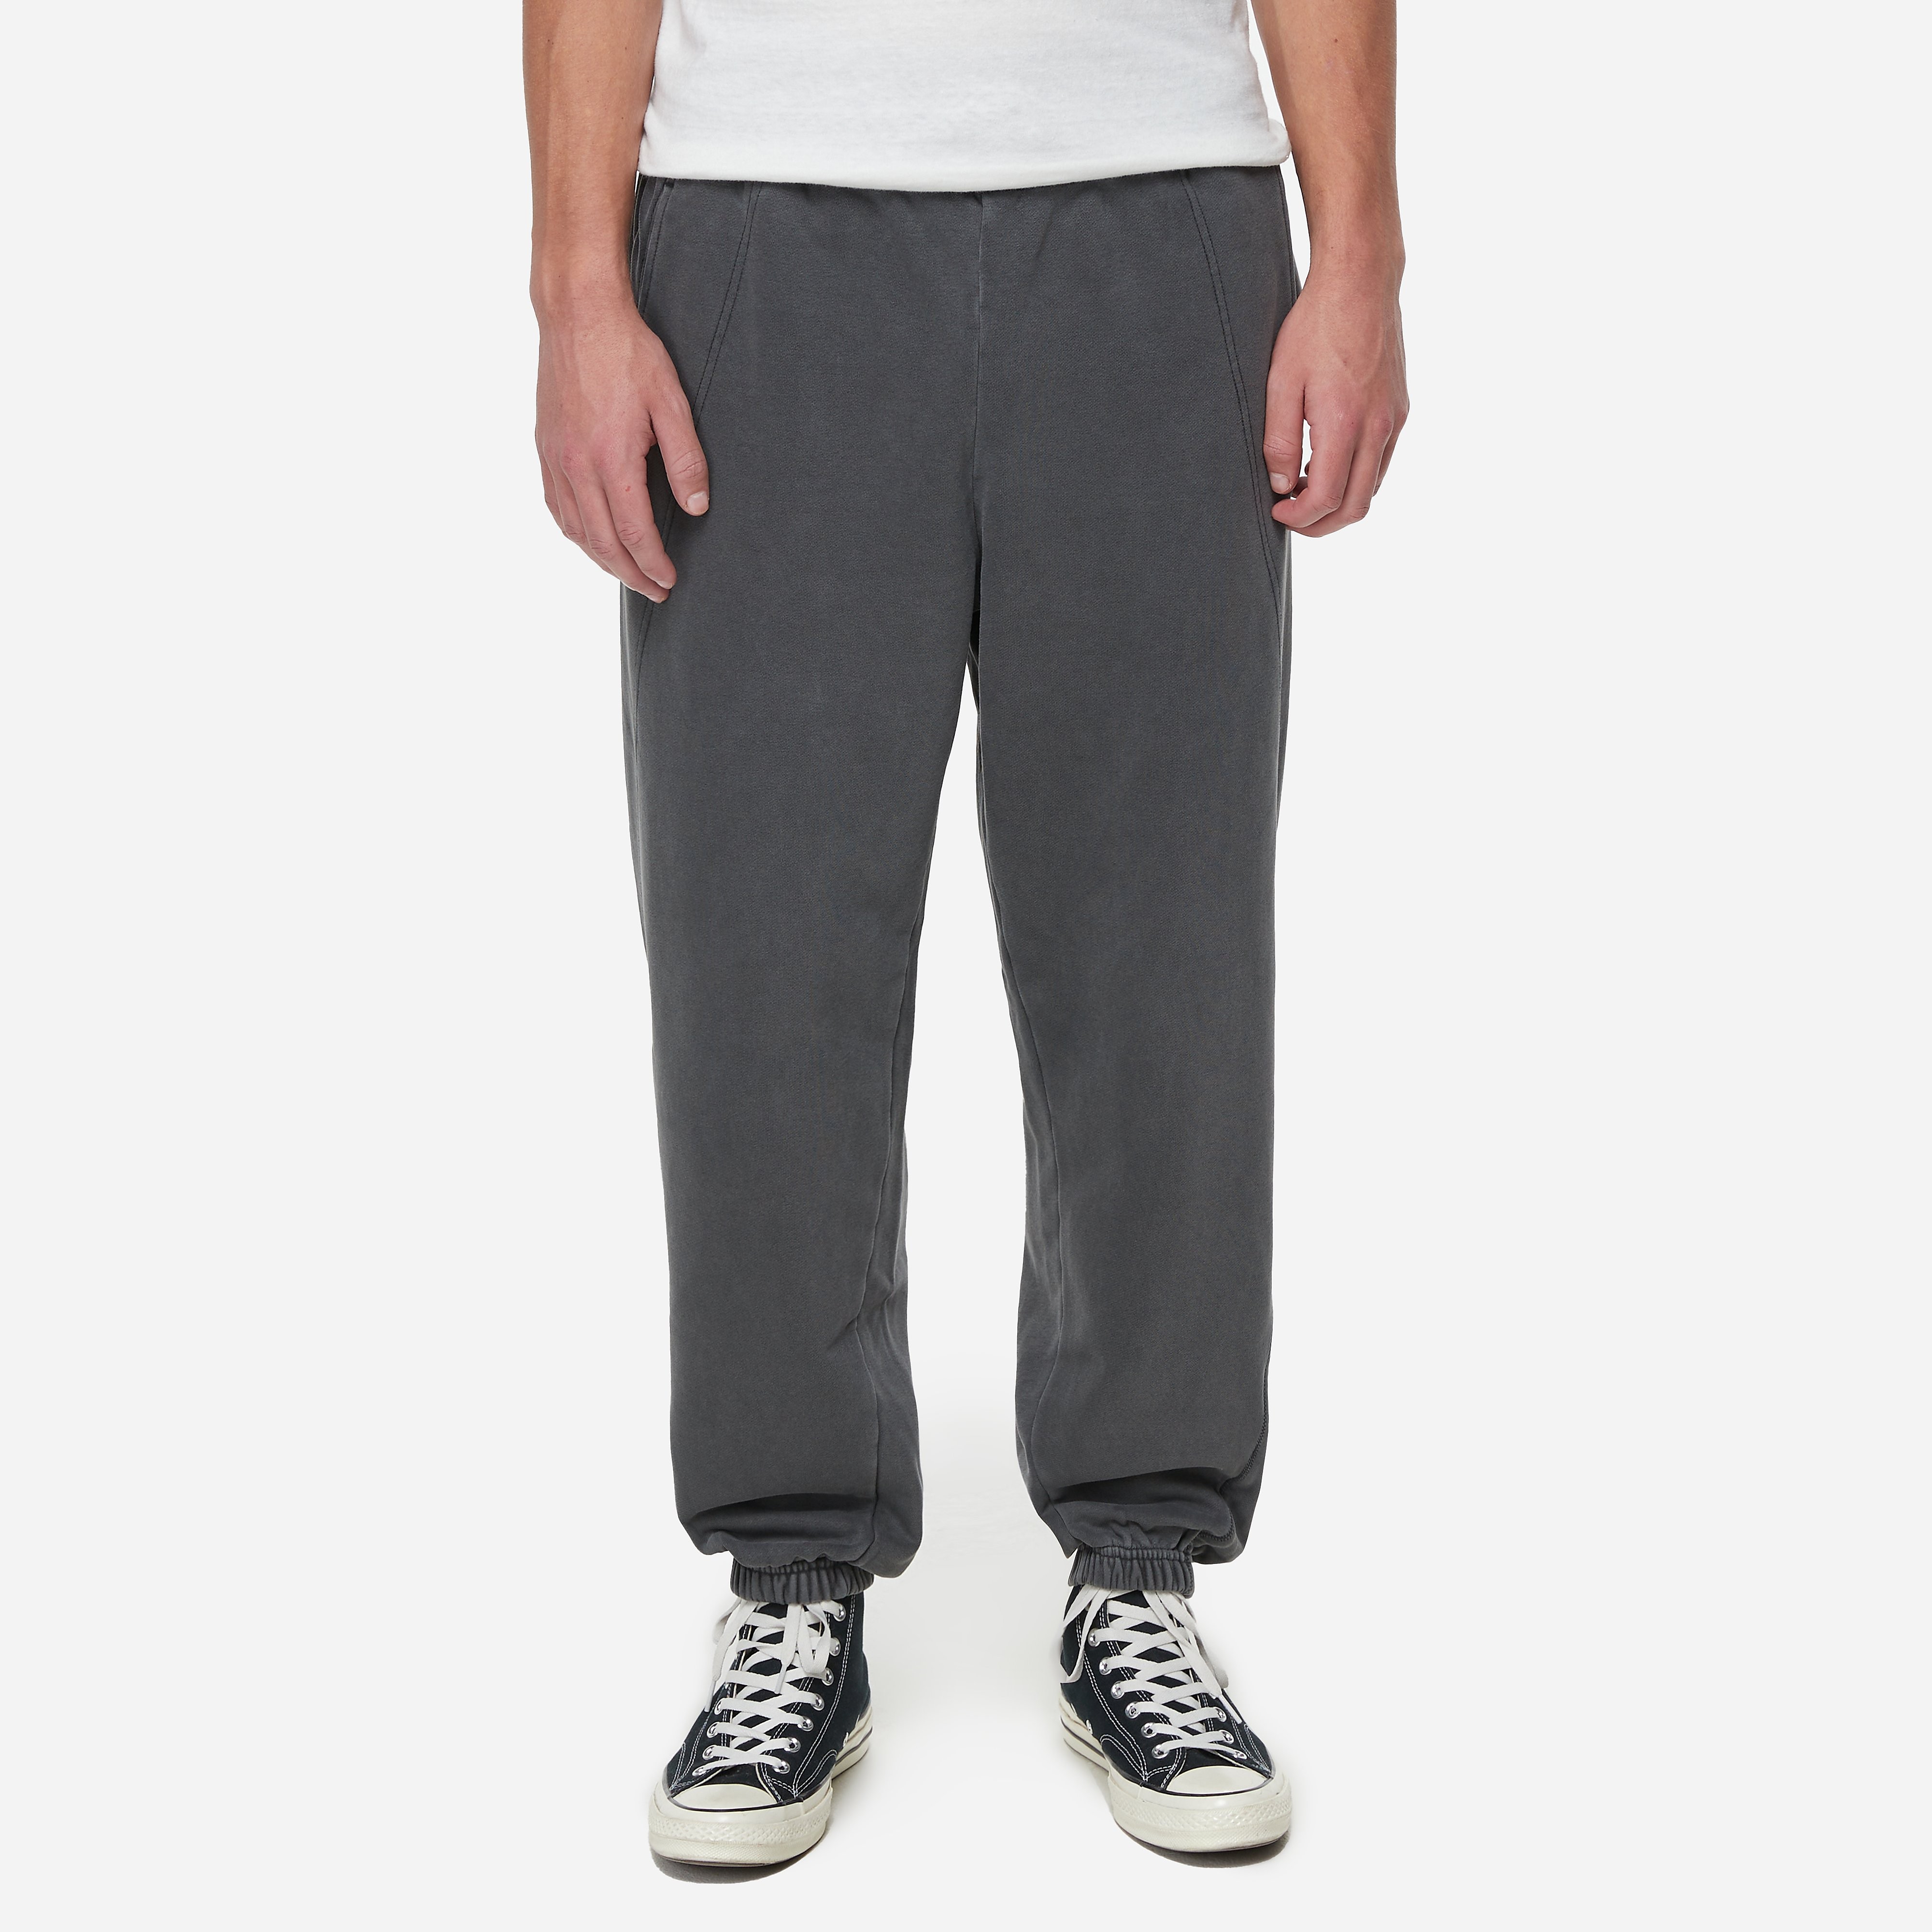 converse x a-cold-wall* track pant, grey